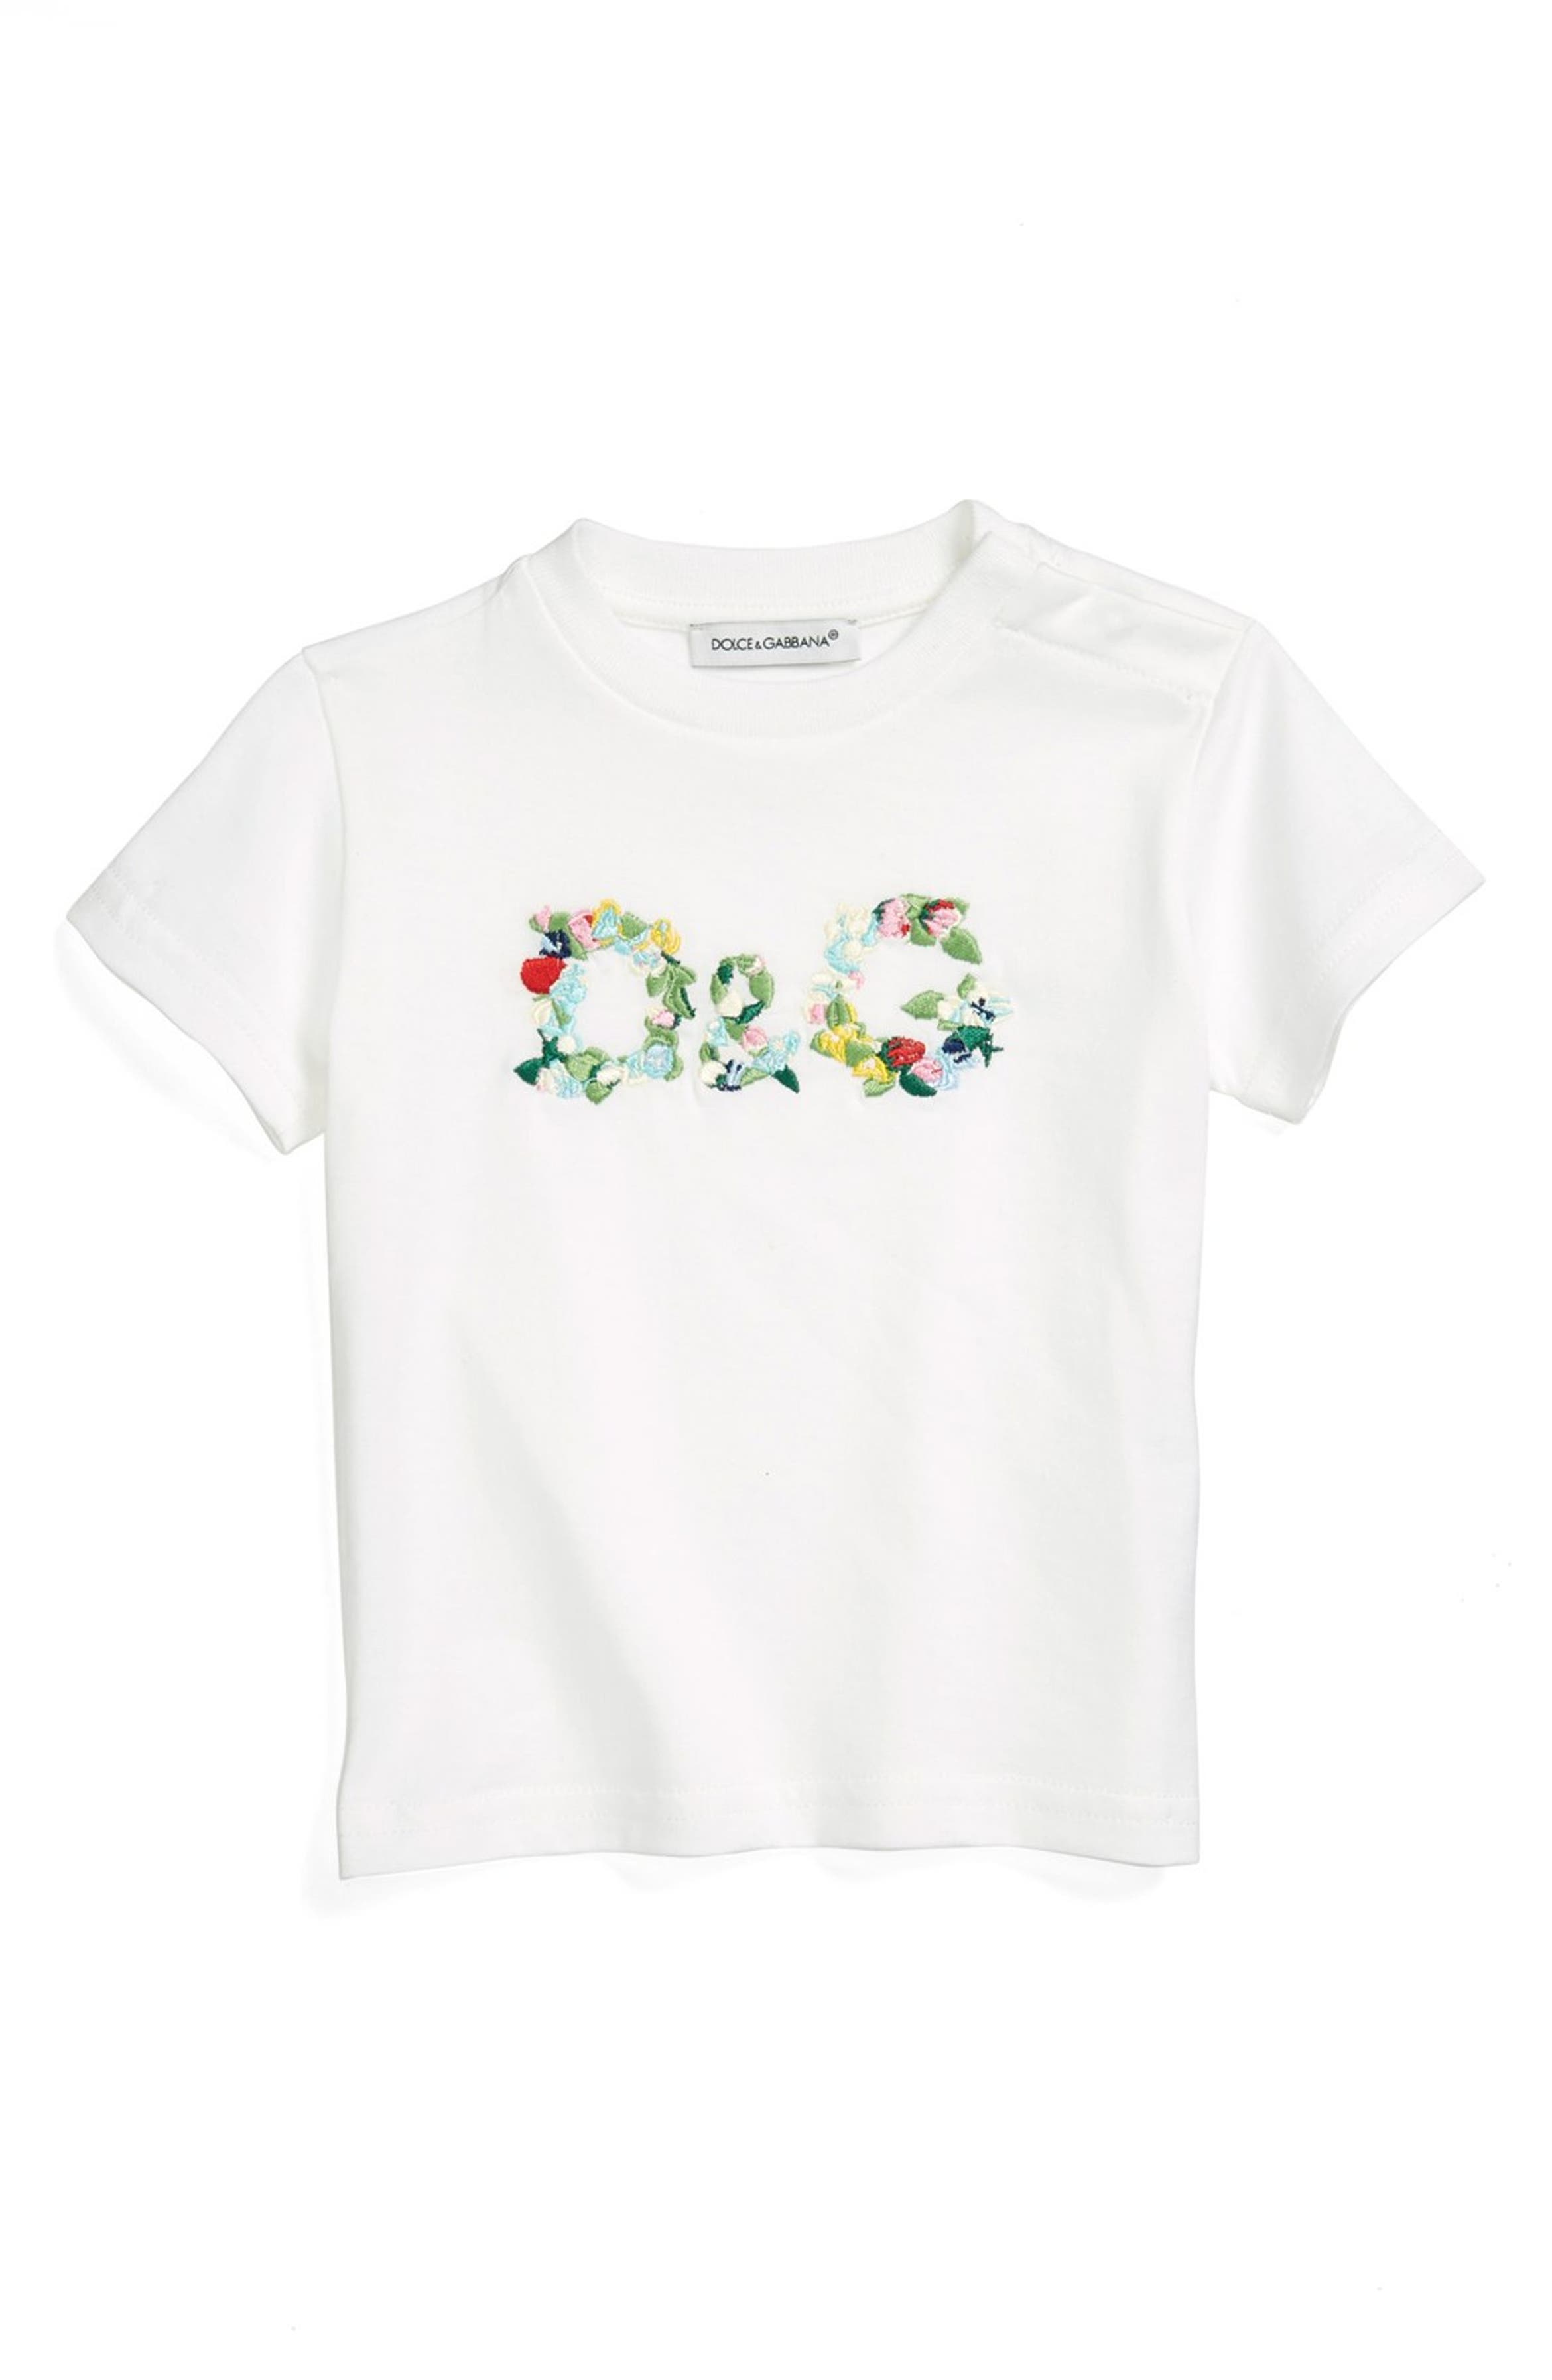 Dolce&Gabbana Embroidery Tee (Baby Girls) | Nordstrom